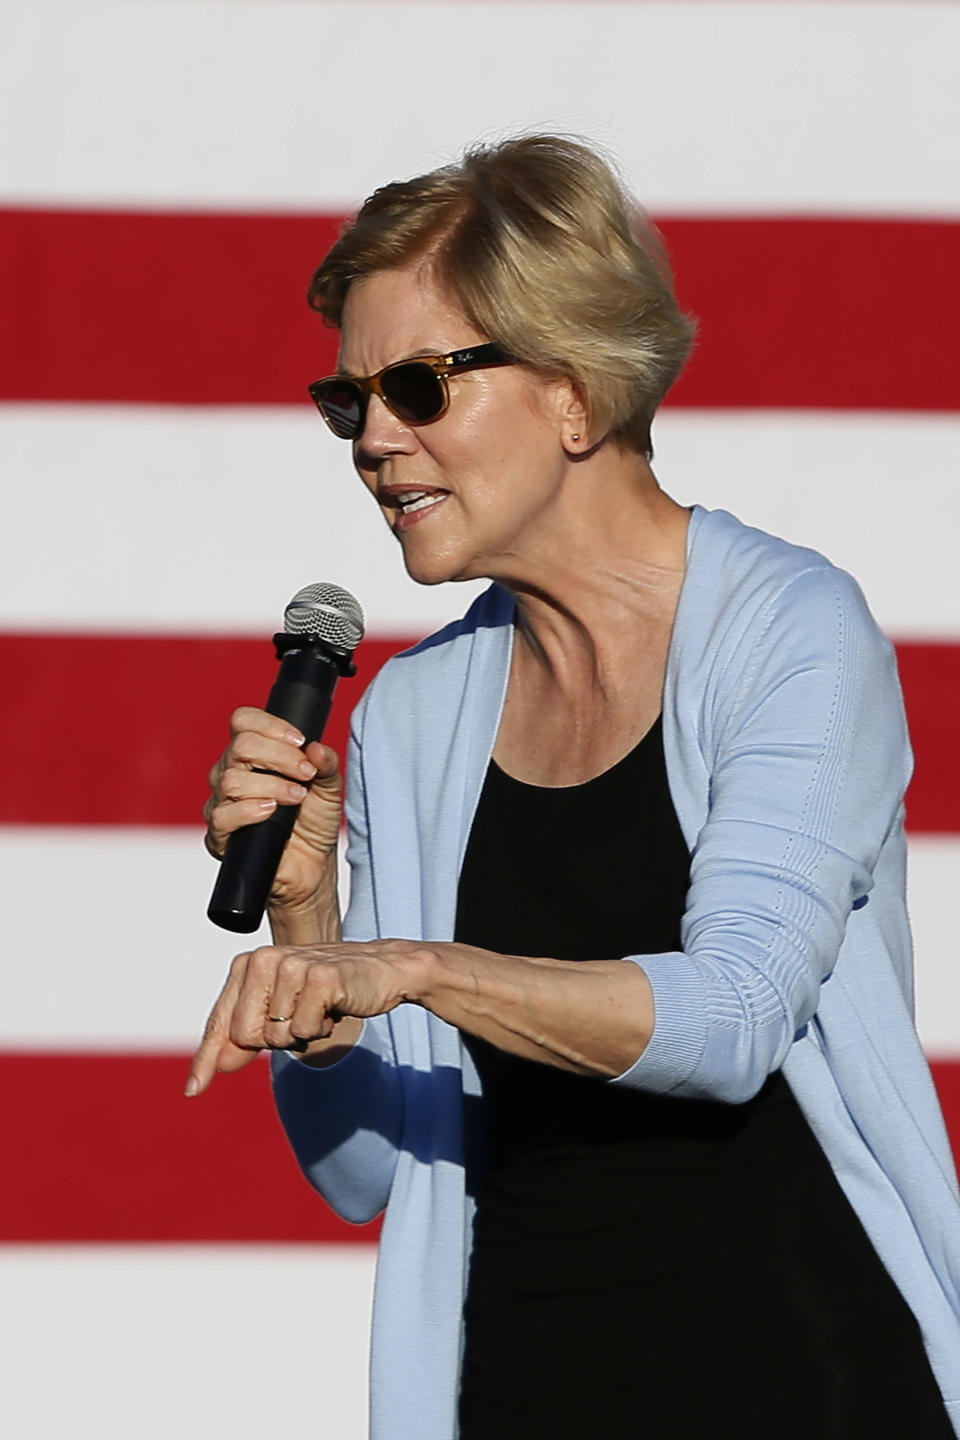 Democratic presidential candidate Elizabeth Warren, D-Mass., speaks during a rally Monday, Aug. 19, 2019 at Macalaster College during a campaign appearance in St. Paul, Minn. (AP Photo/Jim Mone)